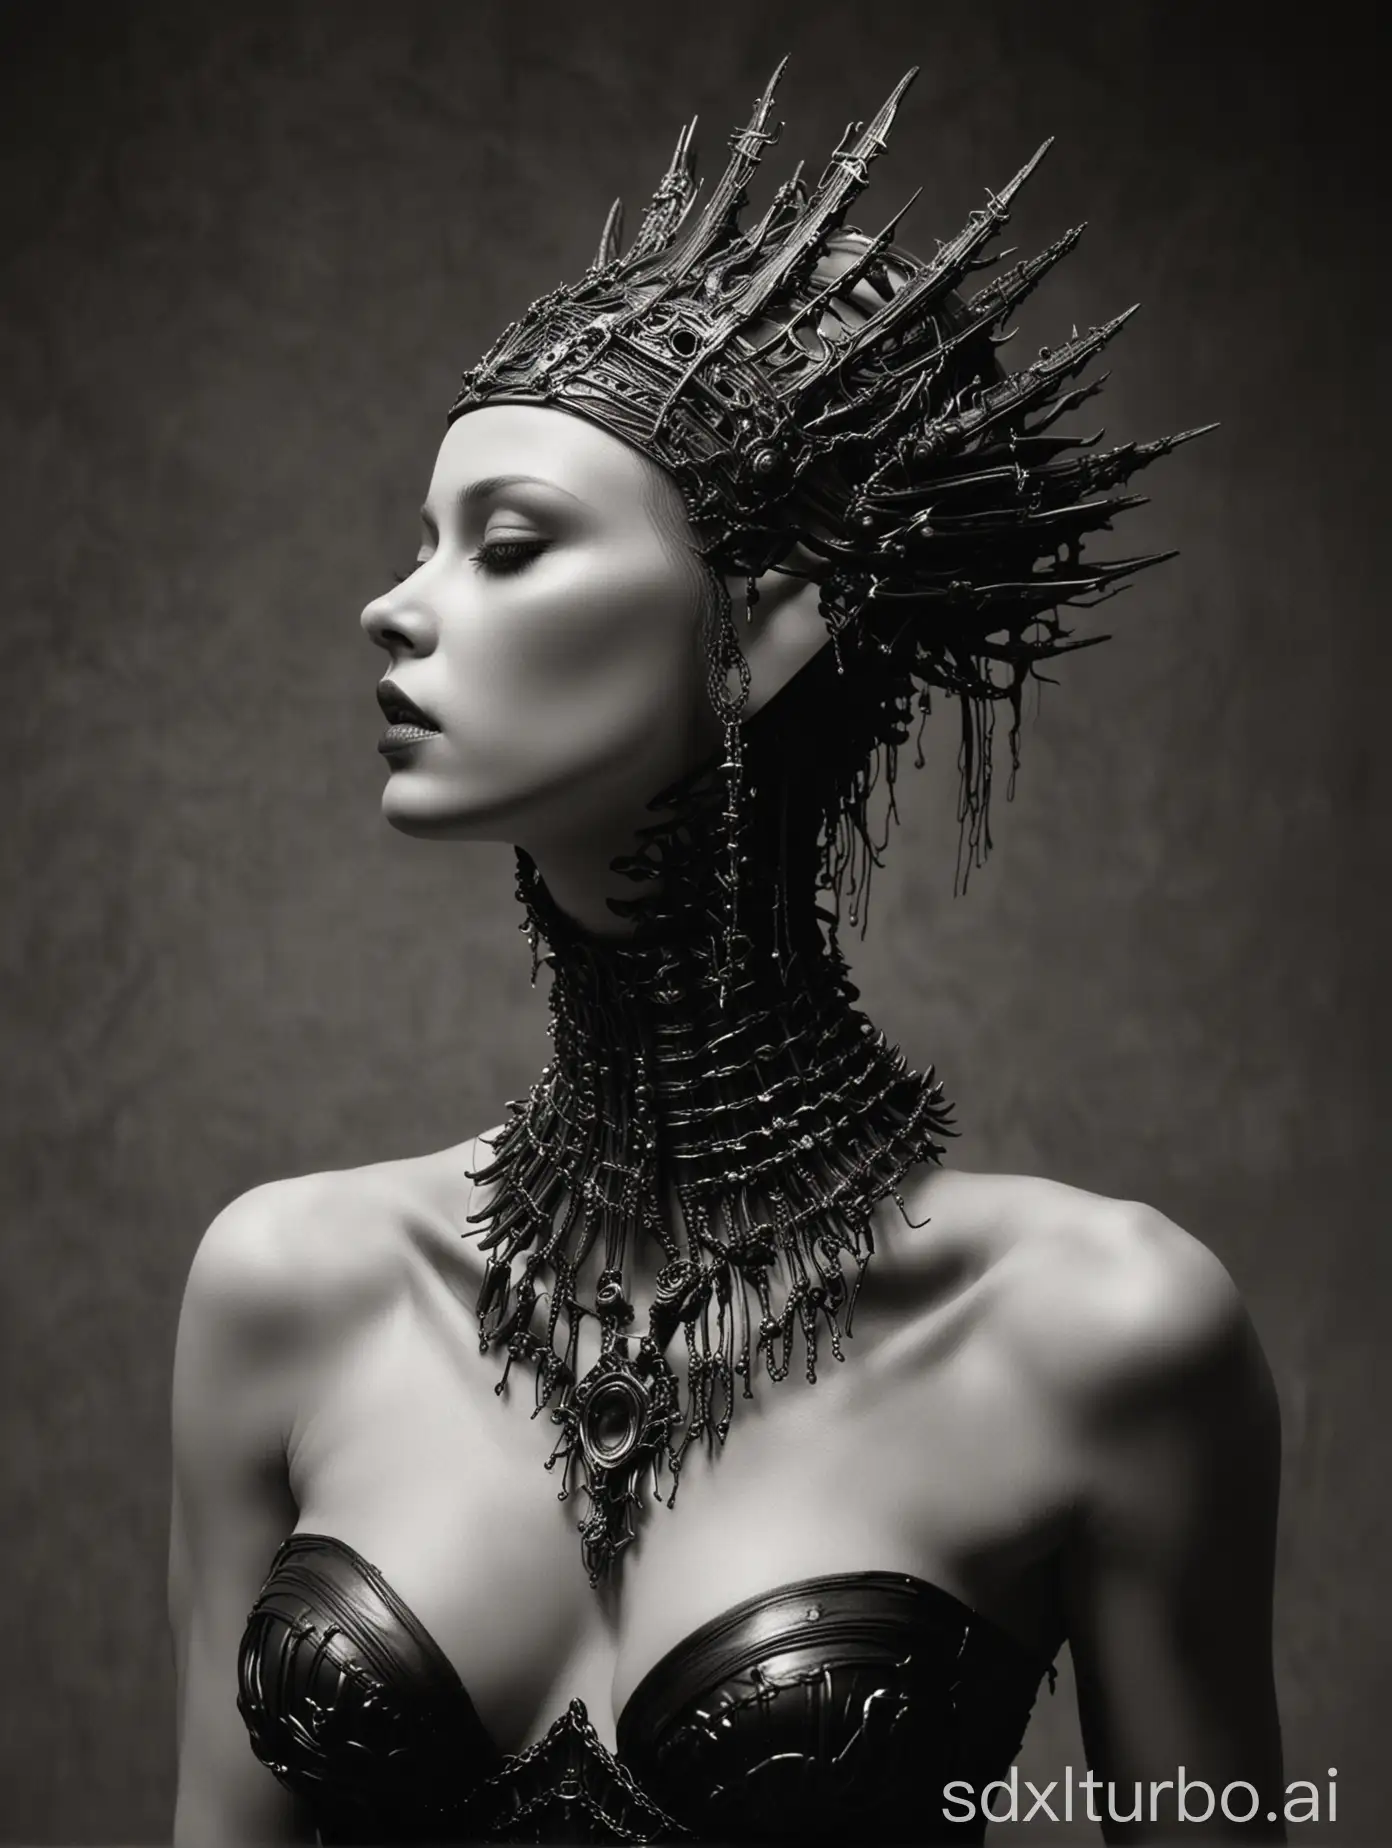 Giger Female with Beksinski tiara, extravagant choker and corset MeatRoots necklace, hero shot, side view, ballerina dancing, short hair or bald, light from below not above, black and white